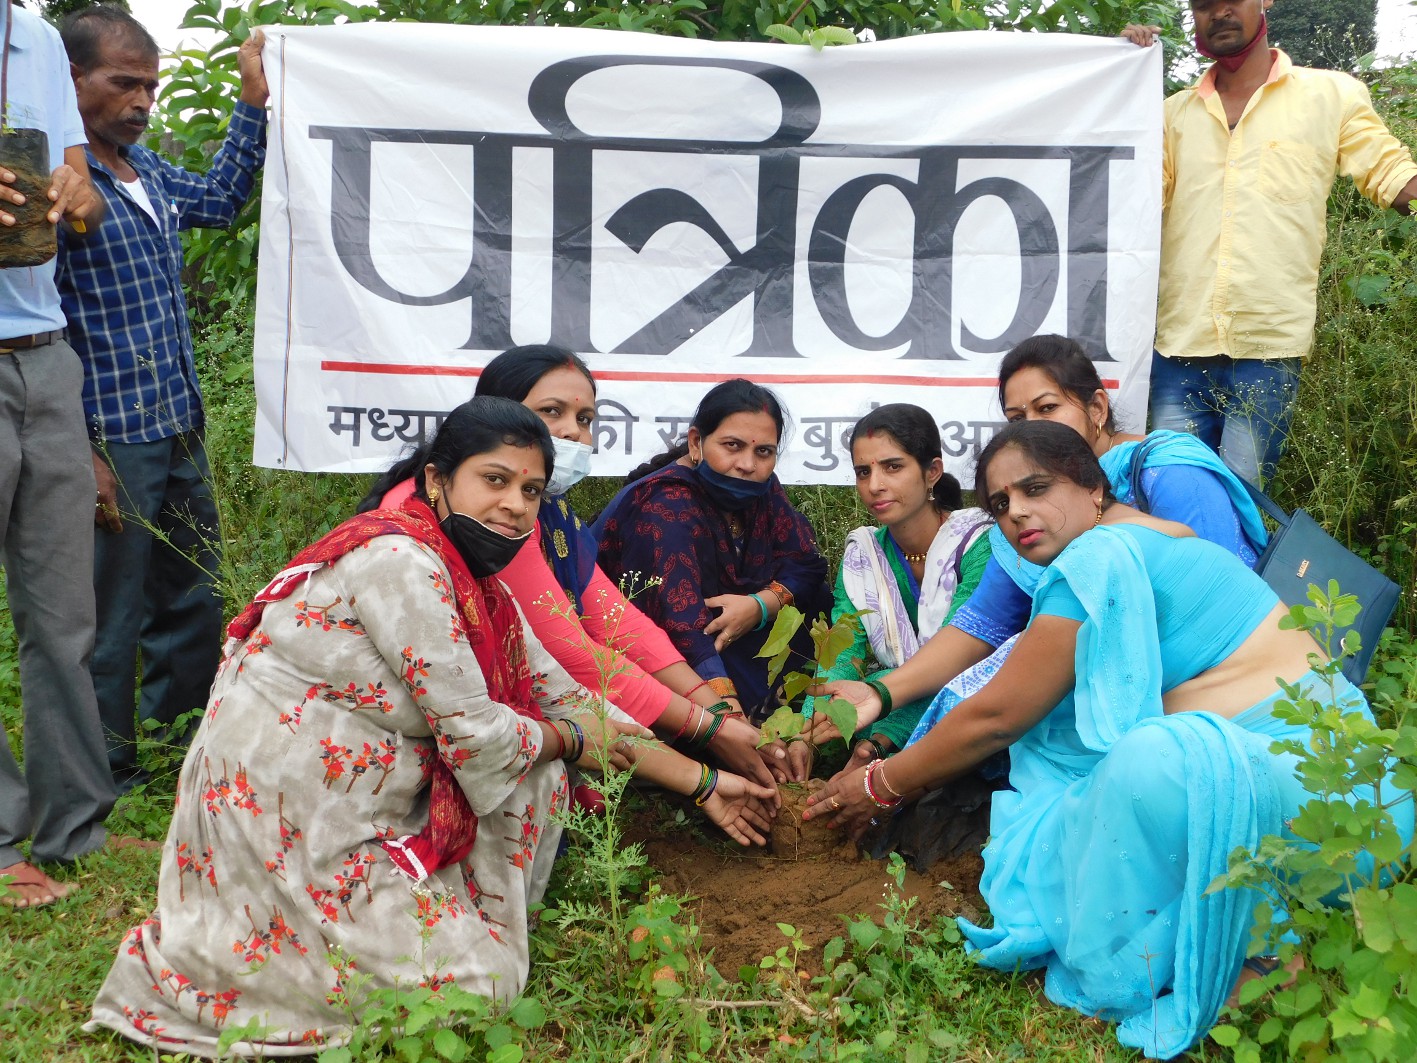 To keep the earth green, plant saplings, sandalwood and fruit trees in